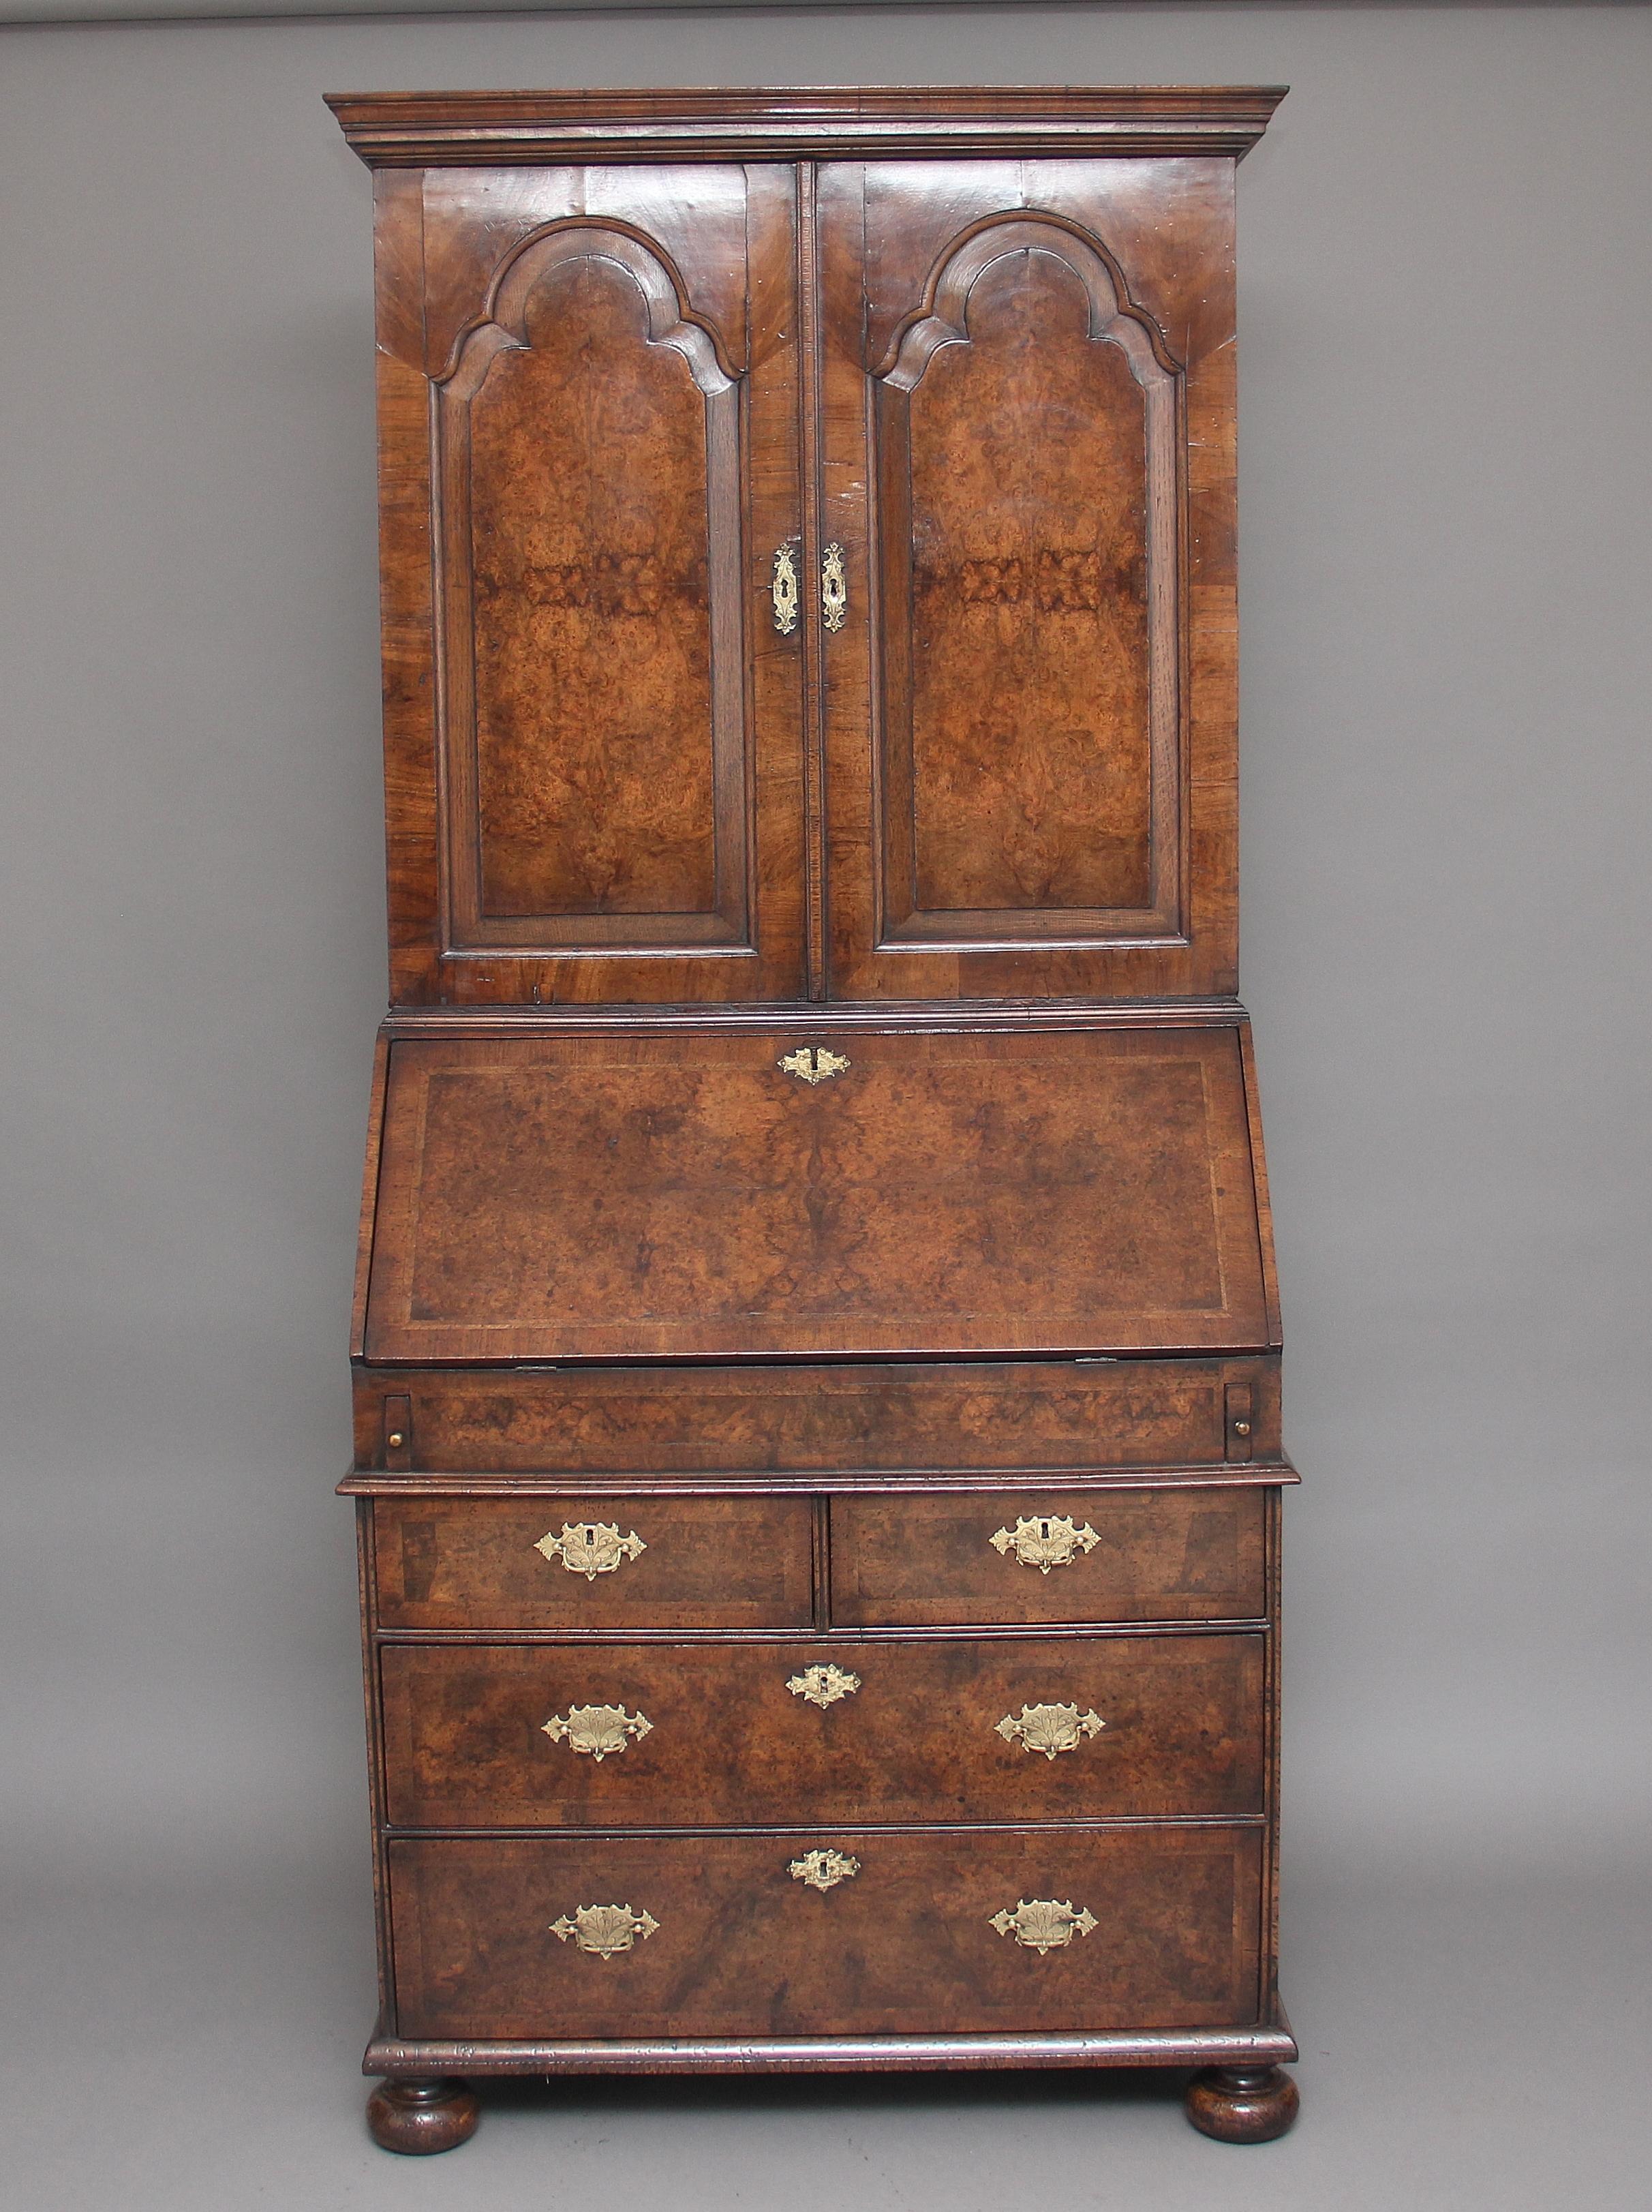 A lovely quality burr walnut bureau bookcase having an 18th century carcass and re-venered in the early 20th century, the moulded cornice above two doors with fielded arched panels opening to reveal various oak lined compartments and drawers, the